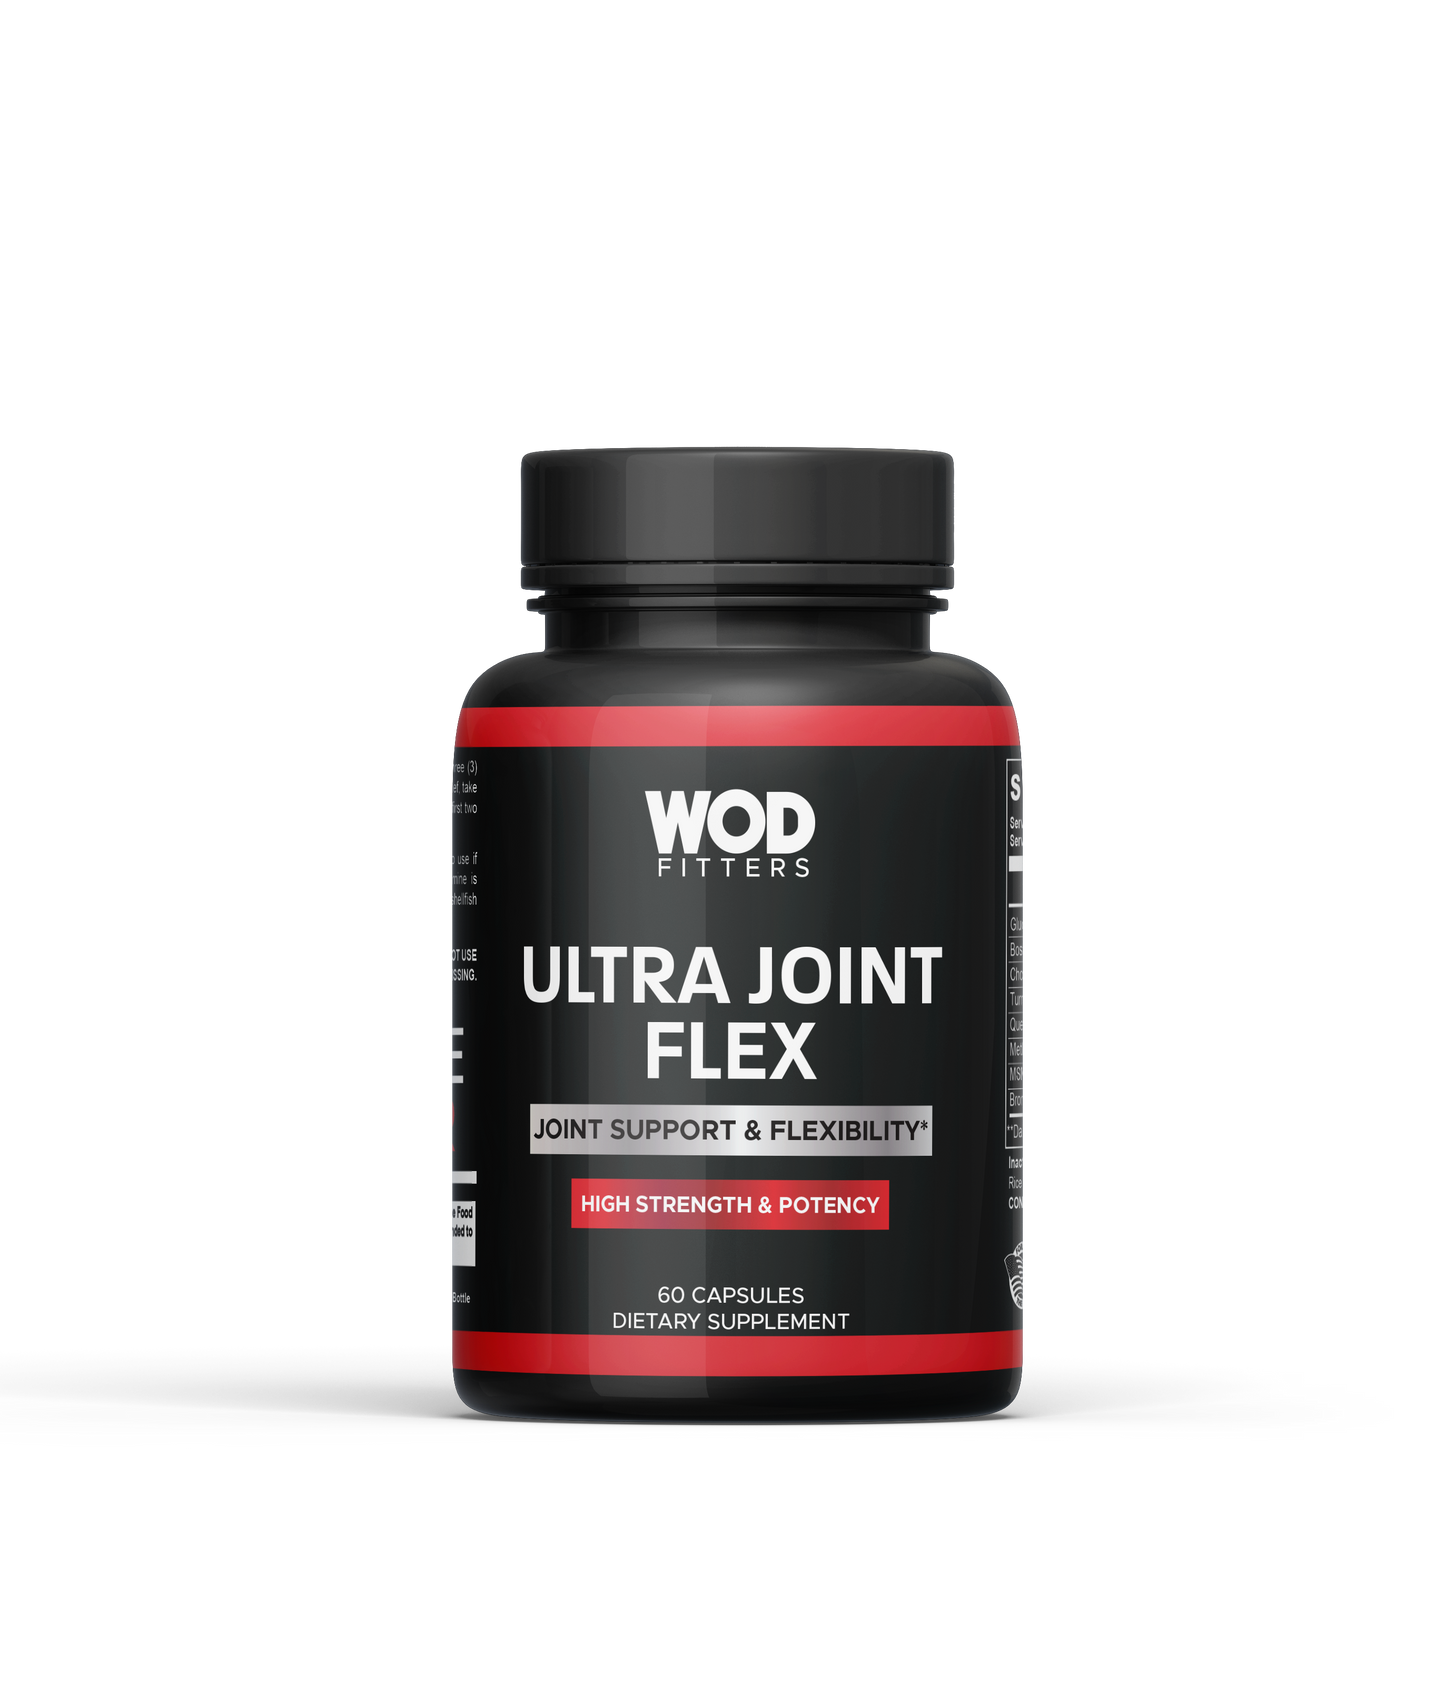 WODFitters Ultra Joint Flex - High Strength and Potency Joint Support and Flexibility Formula